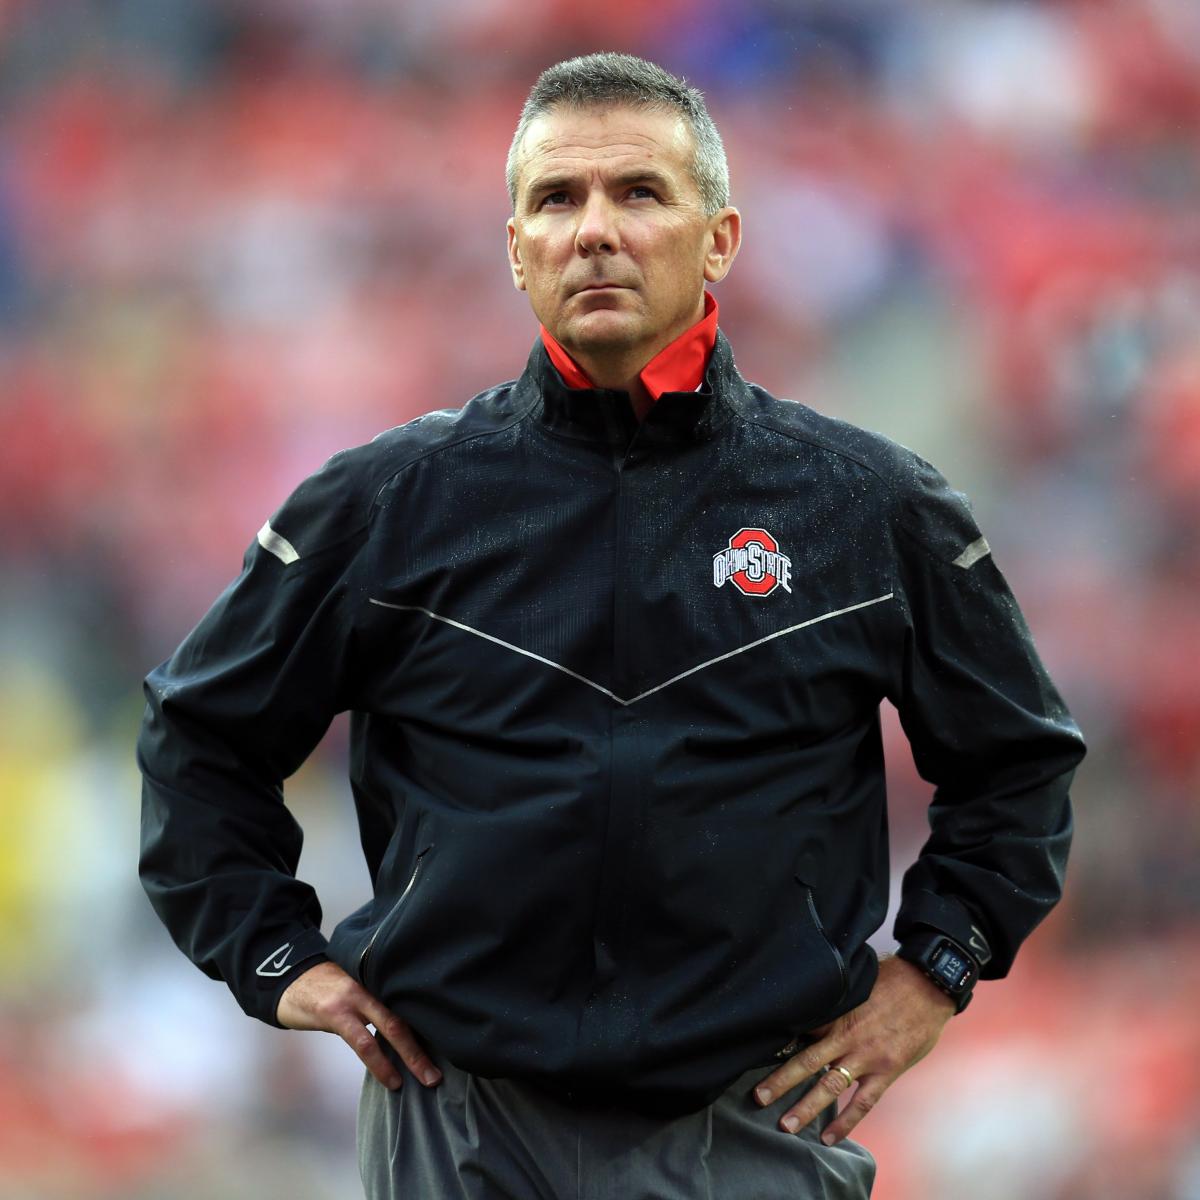 Ohio State National Signing Day 2017 5 Takeaways from Buckeyes' Class